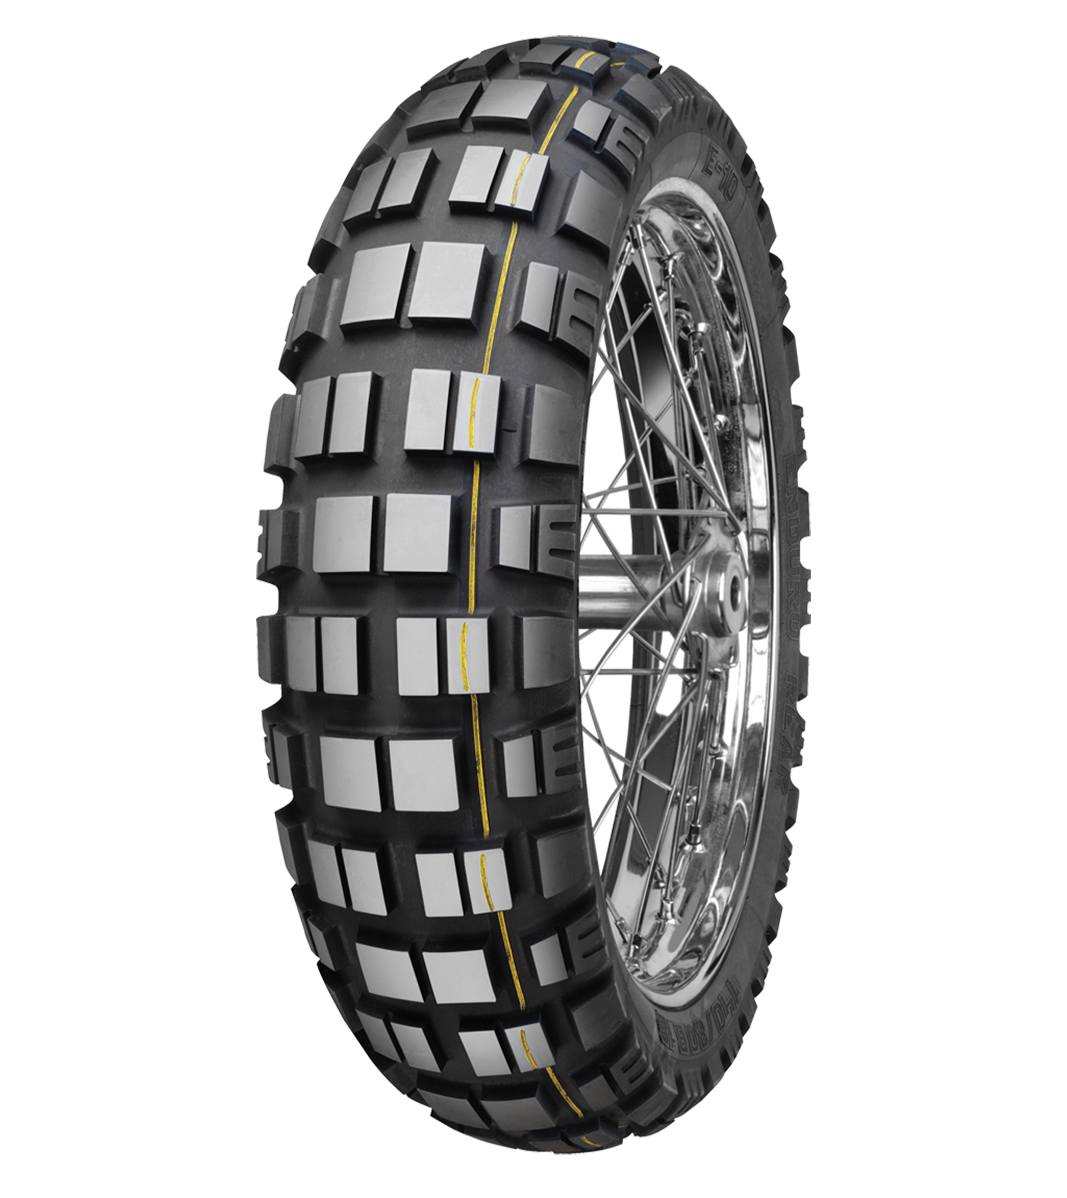 Mitas E-10 ENDURO 150/70B18 Trail OFF Trail DAKAR 70T Yellow Tubeless Rear Tire, 224163, 150/70B18, Adventure Touring, E Series, E-10 Enduro, Rear, Trail, Trail OFF, Tires - Imported and distributed in North & South America by Lindeco Genuine Powersports - Premier Powersports Equipment and Accessories for Motorcycle Enthusiasts, Professional Riders and Dealers.